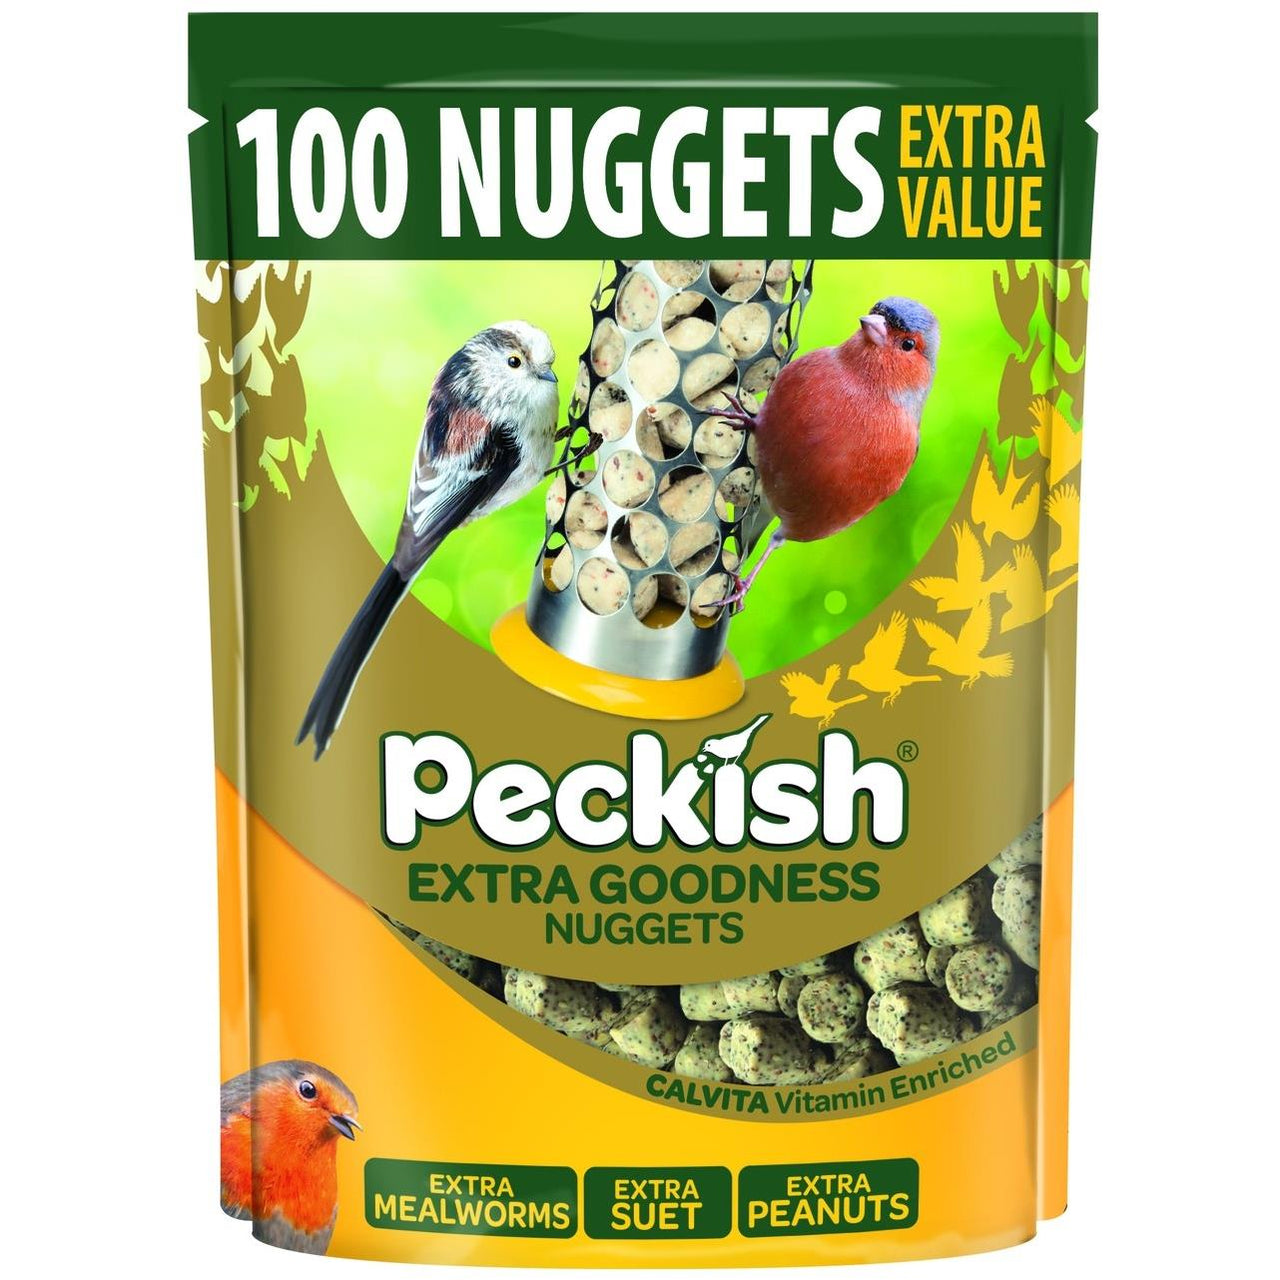 Peckish - Extra Goodness Nuggets, 2kg Pack